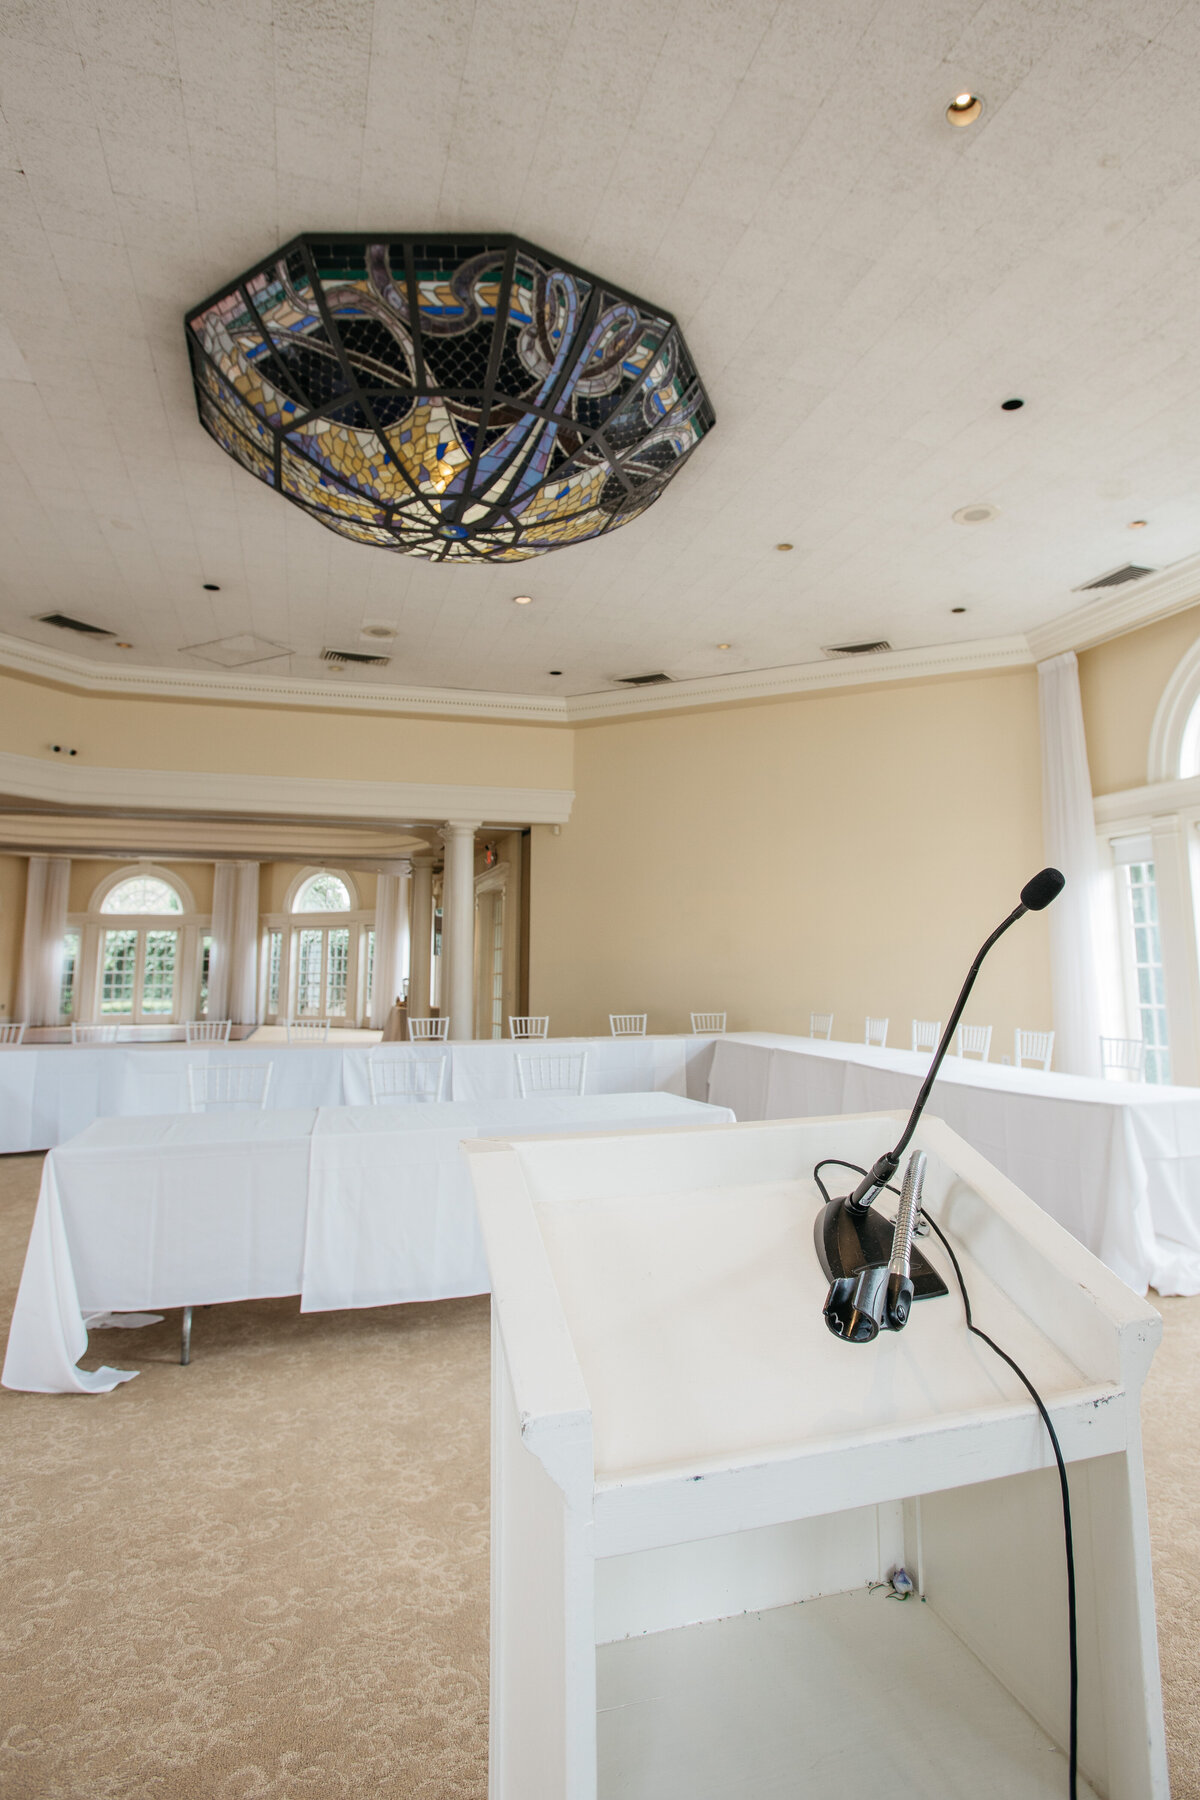 Vizcaya's Pavilion upgrades your conference room meeting space with our custom stain-glass chandelier and elegant room design.